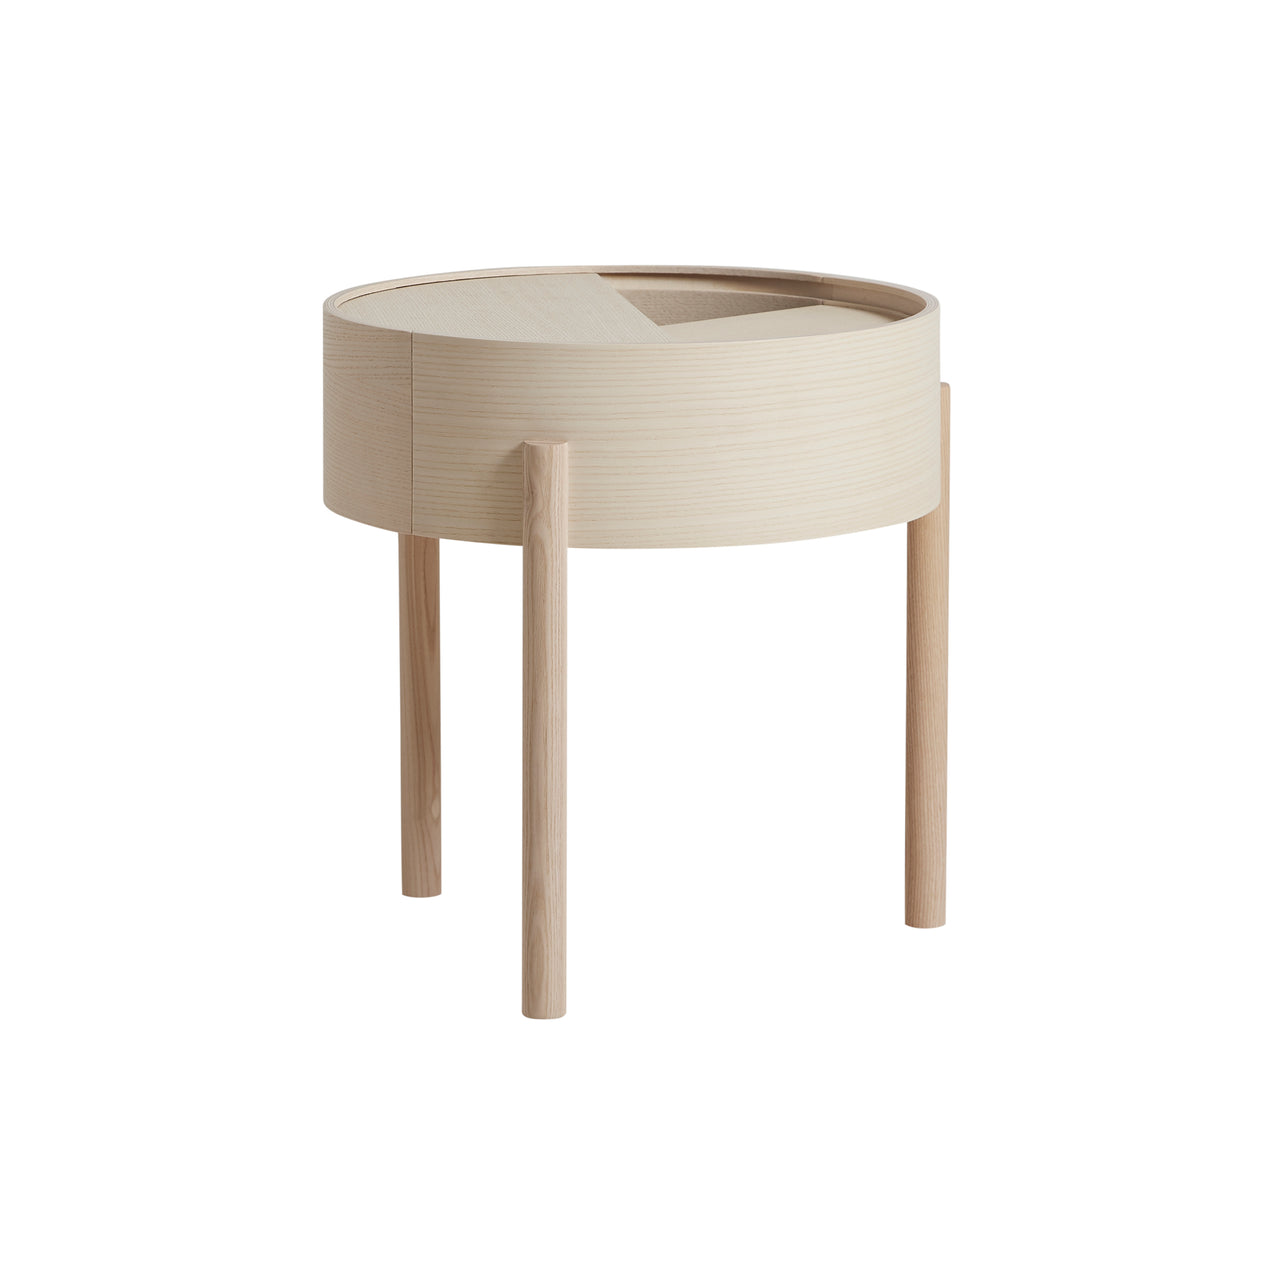 Arc Side Table: White Pigmented Ash